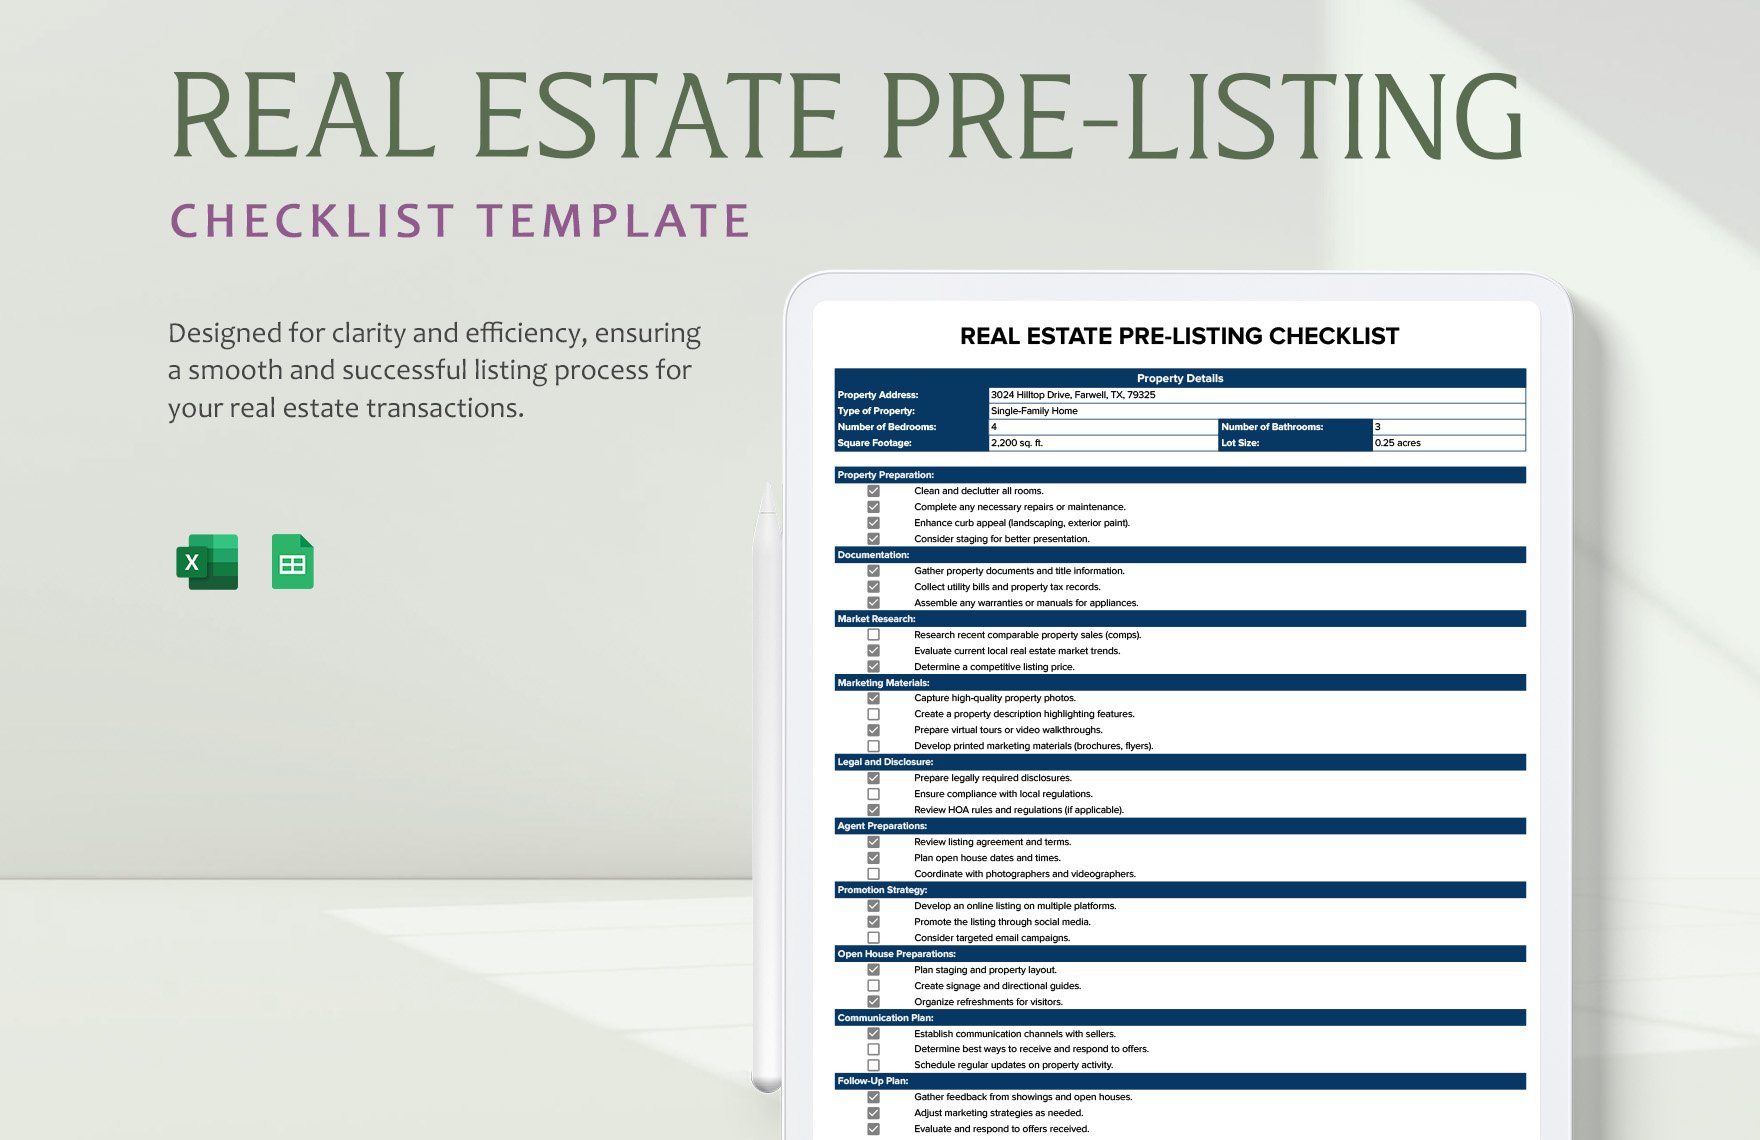 Real Estate Pre-Listing Checklist Template in Excel, Google Sheets